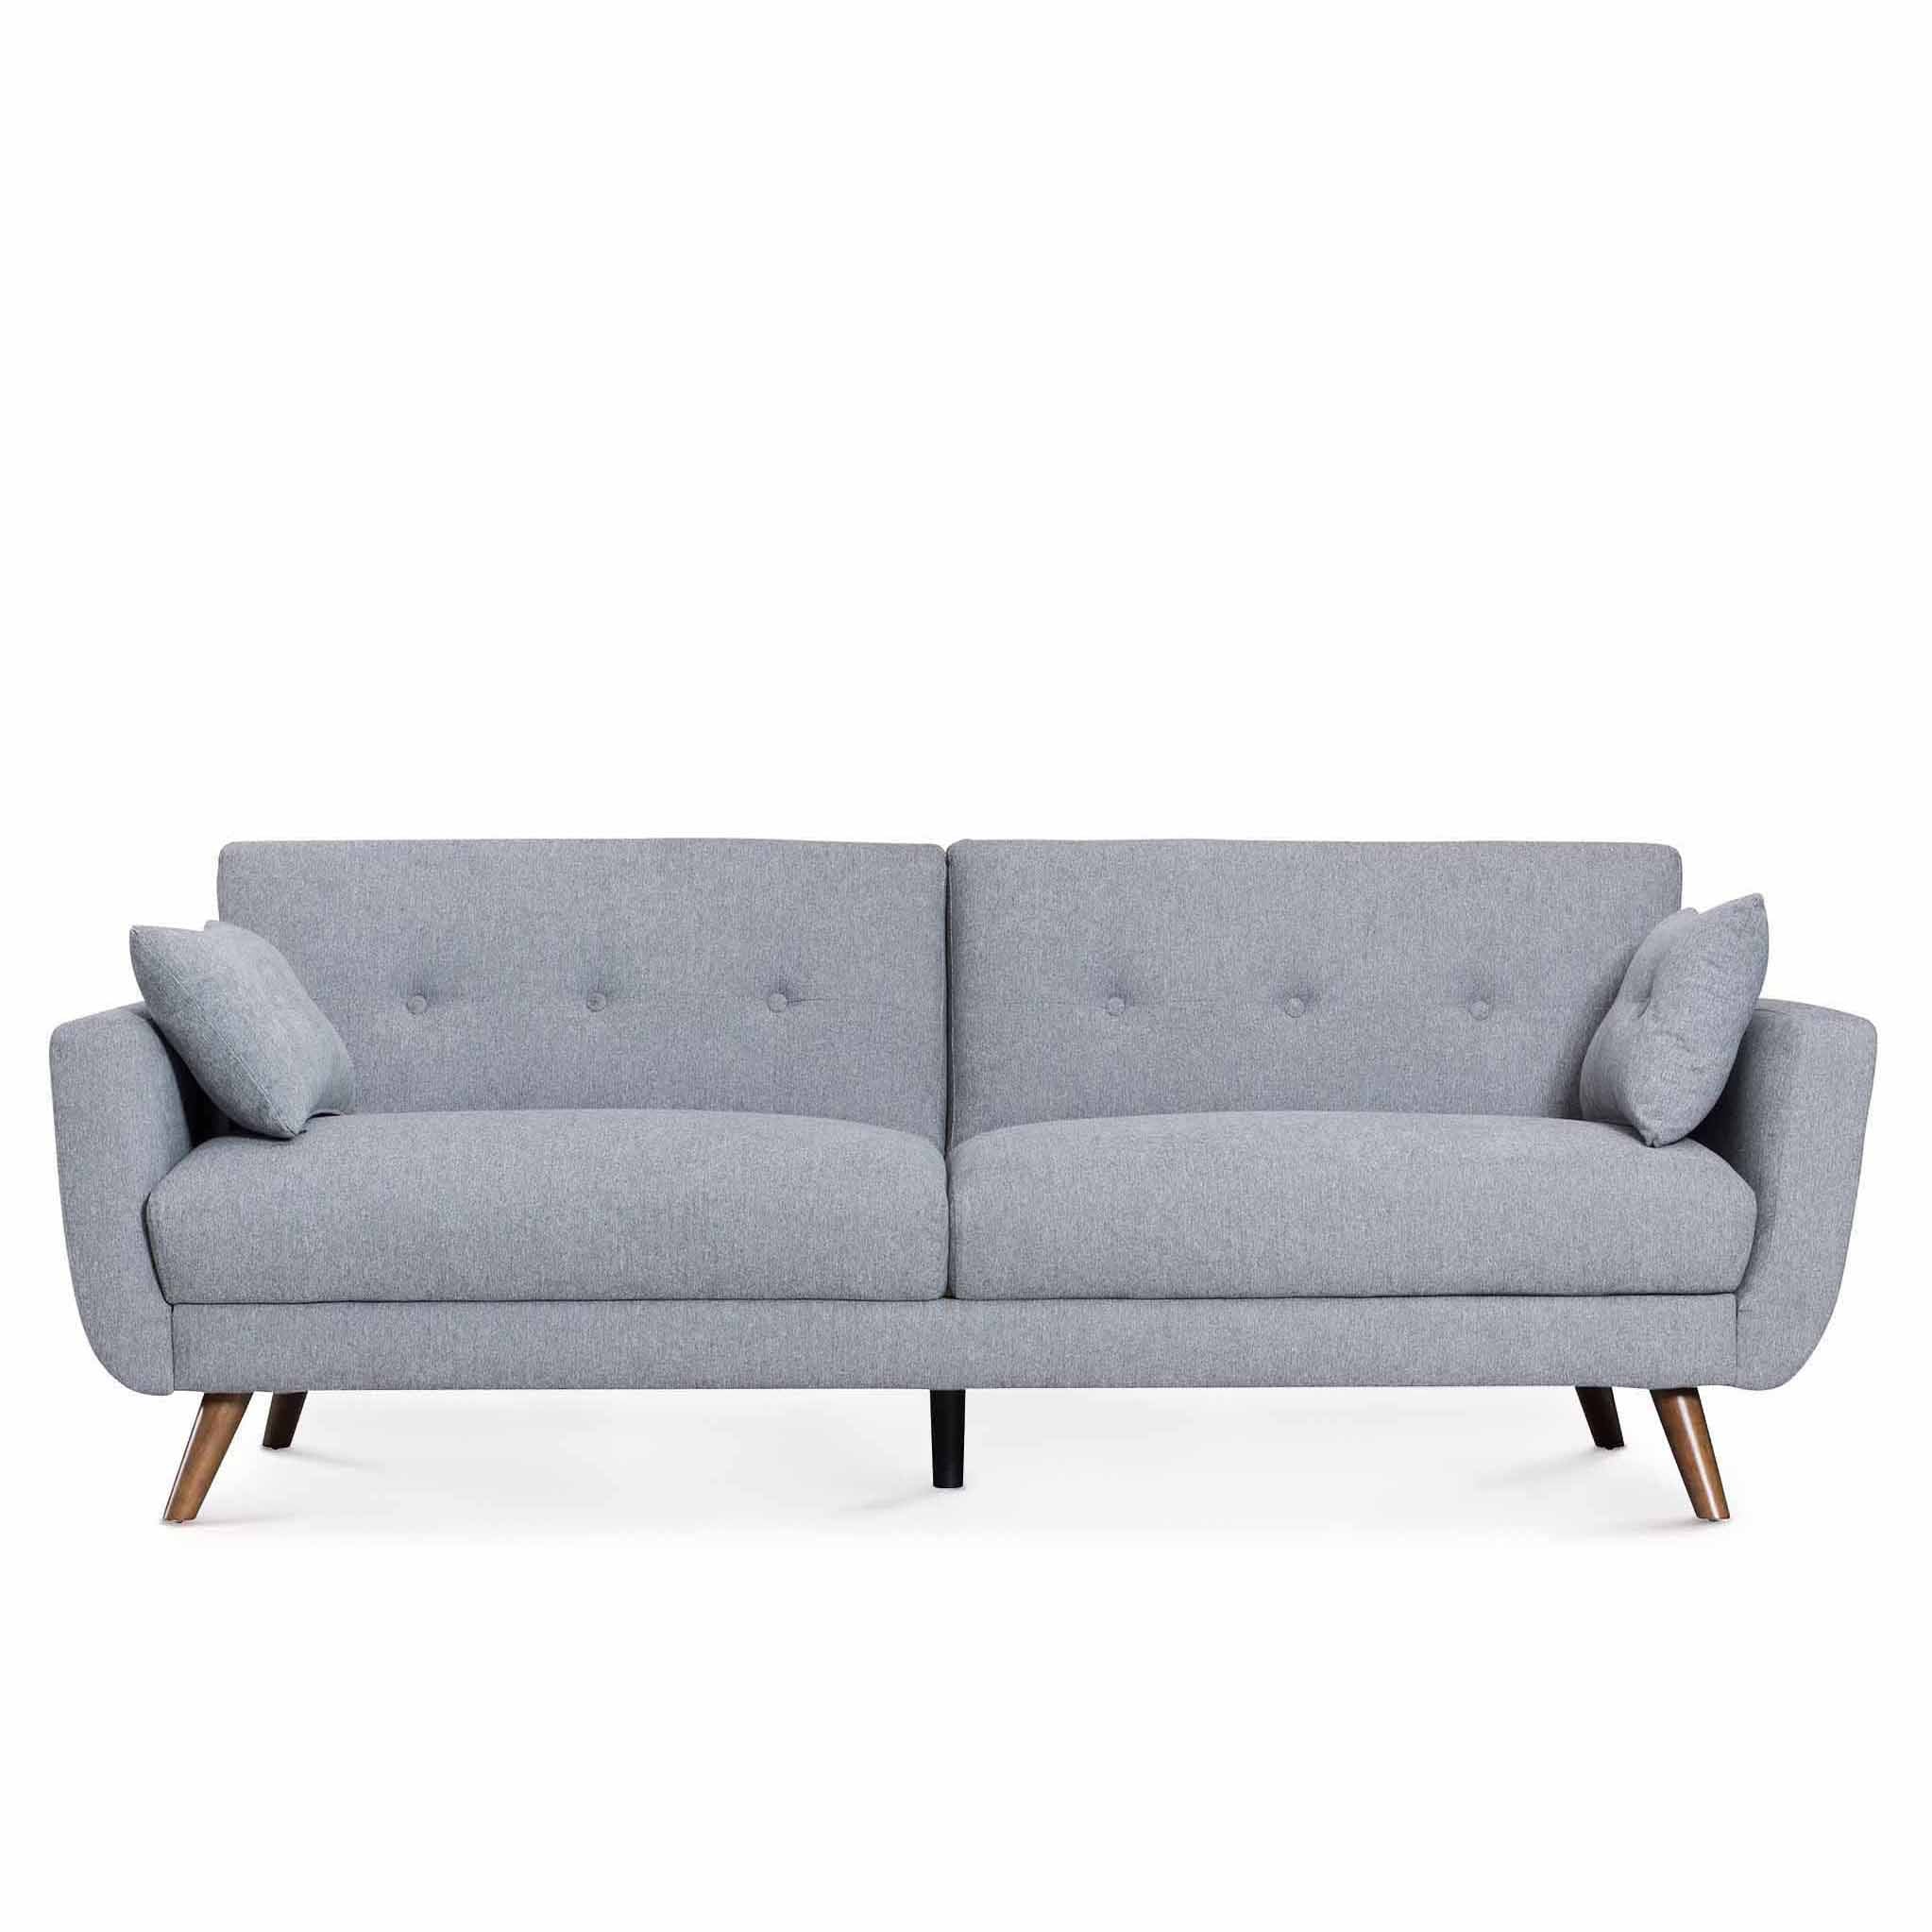 Trom Grey 3 Seater Futon Sofa Bed Click Clack Bed Roseland